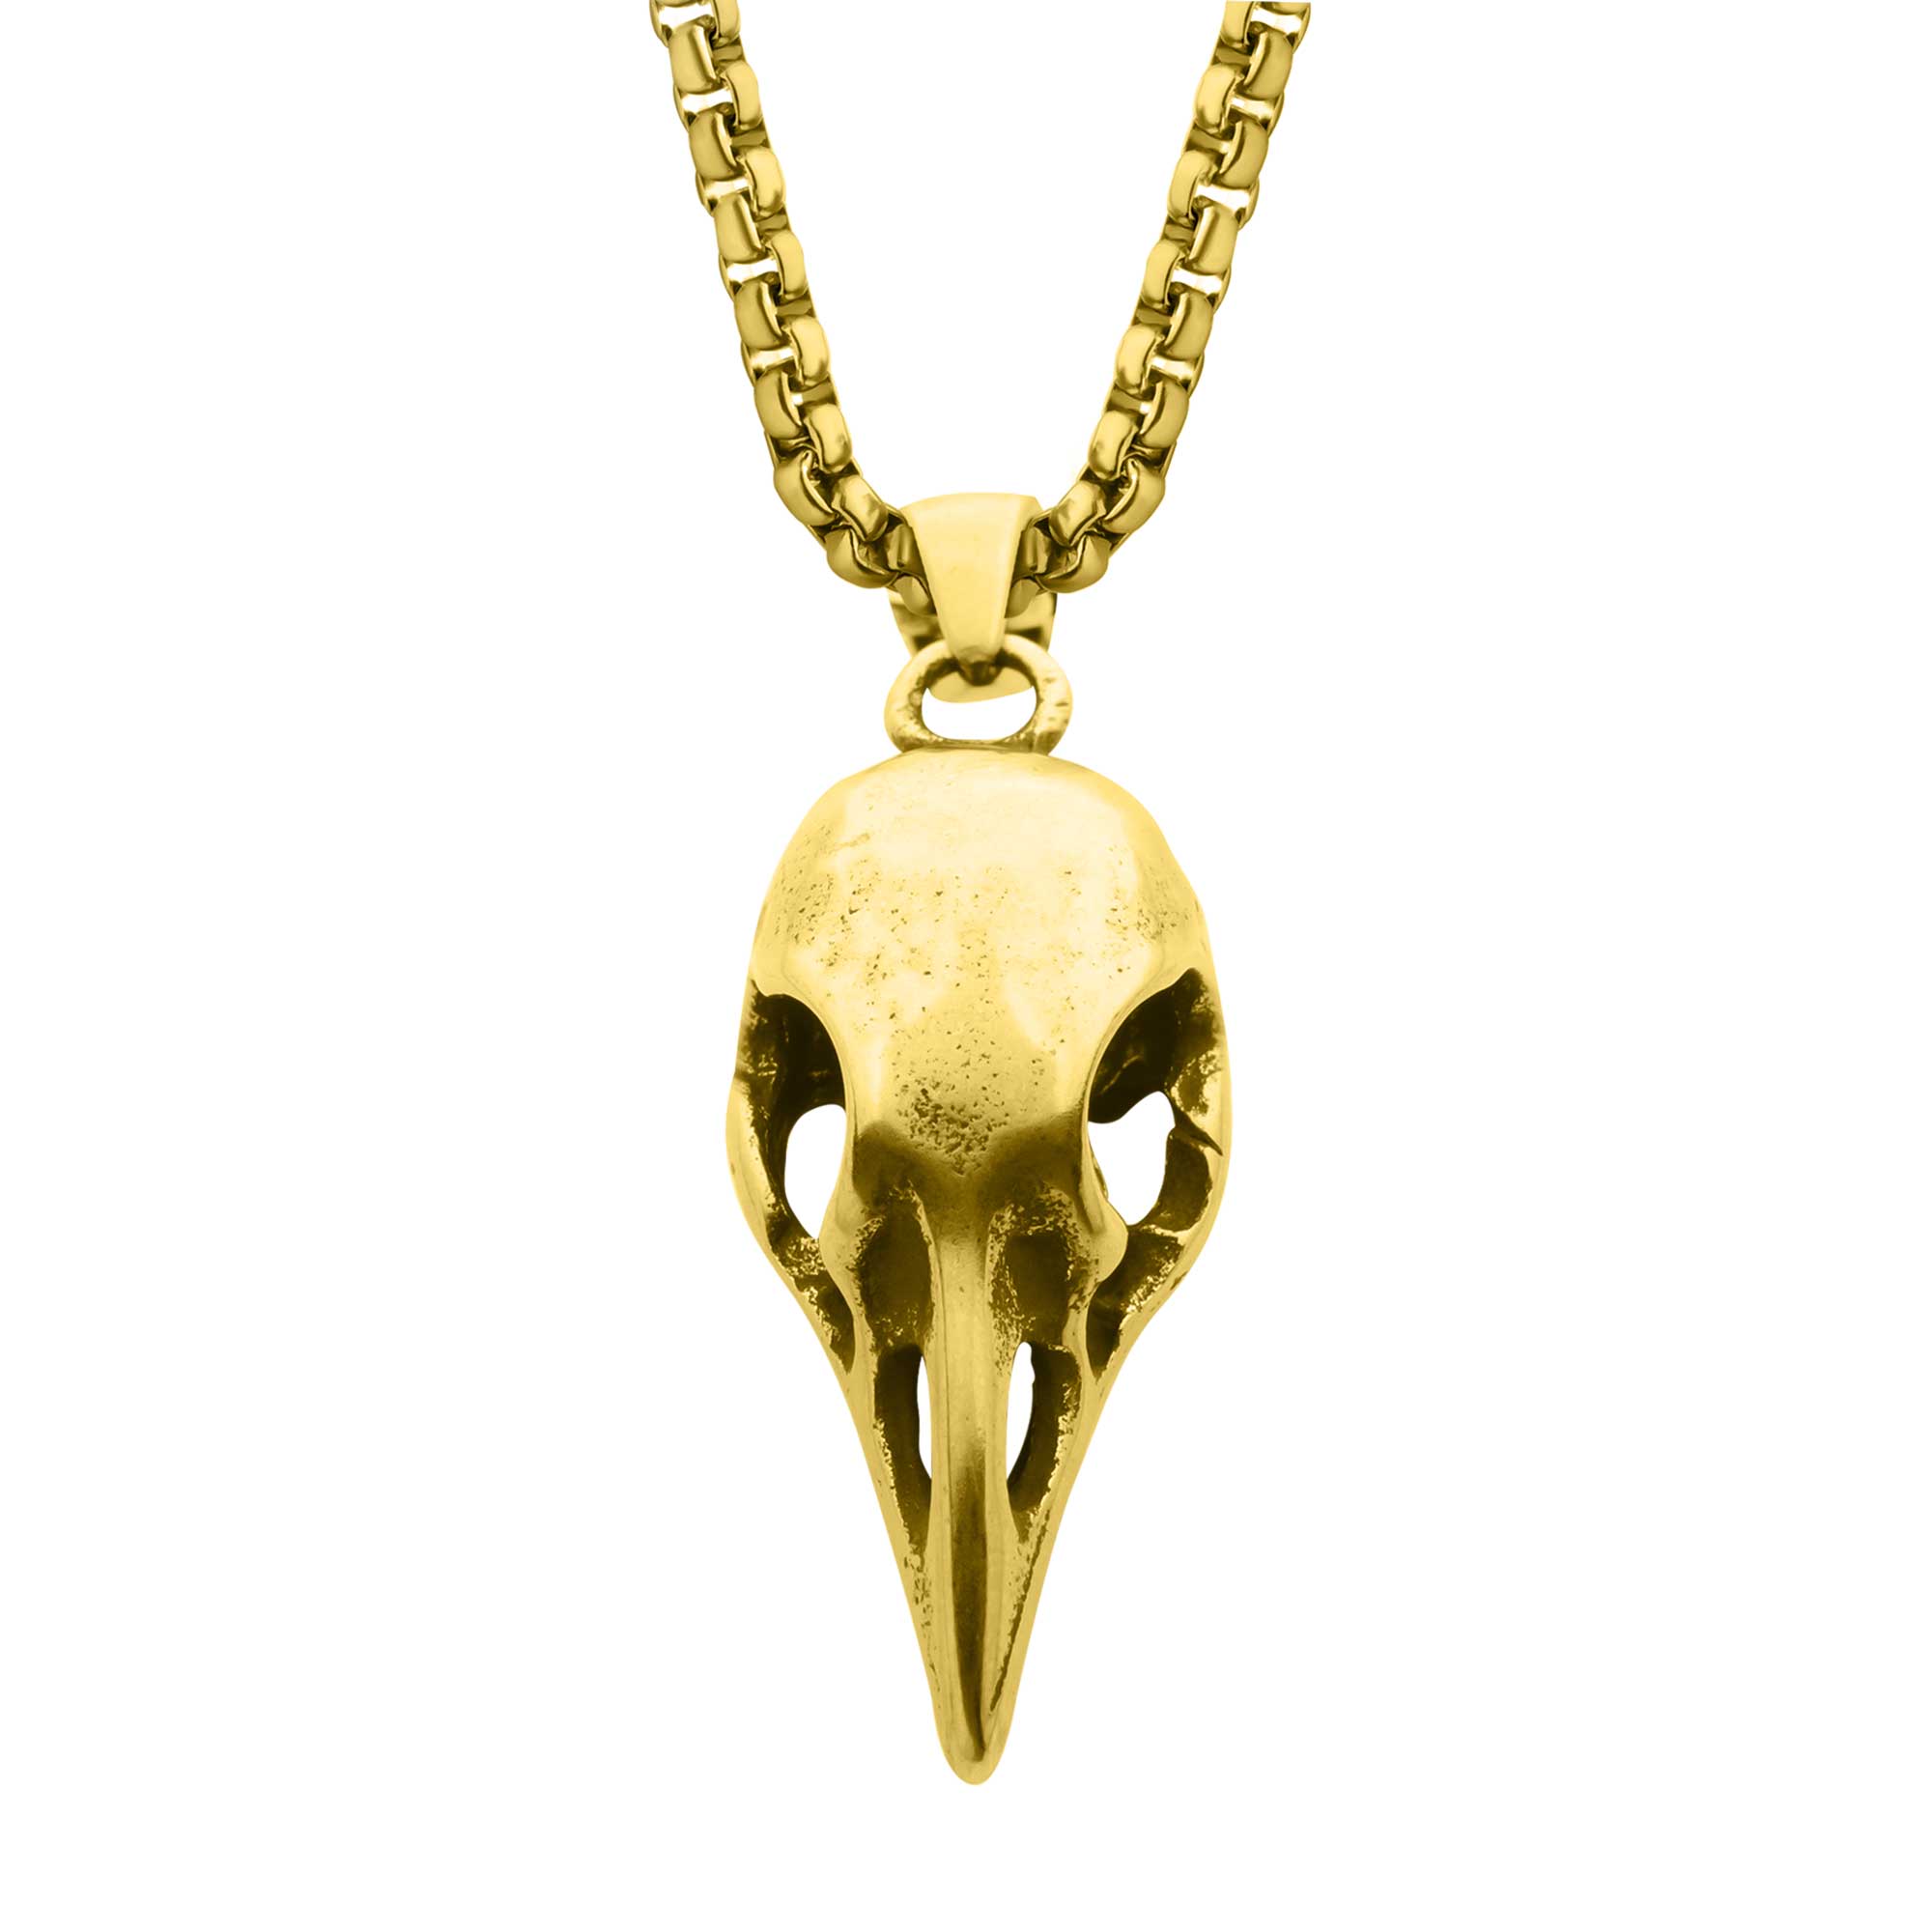 Distressed Matte 18Kt Gold IP Crow Skull Pendant with Chain Morin Jewelers Southbridge, MA